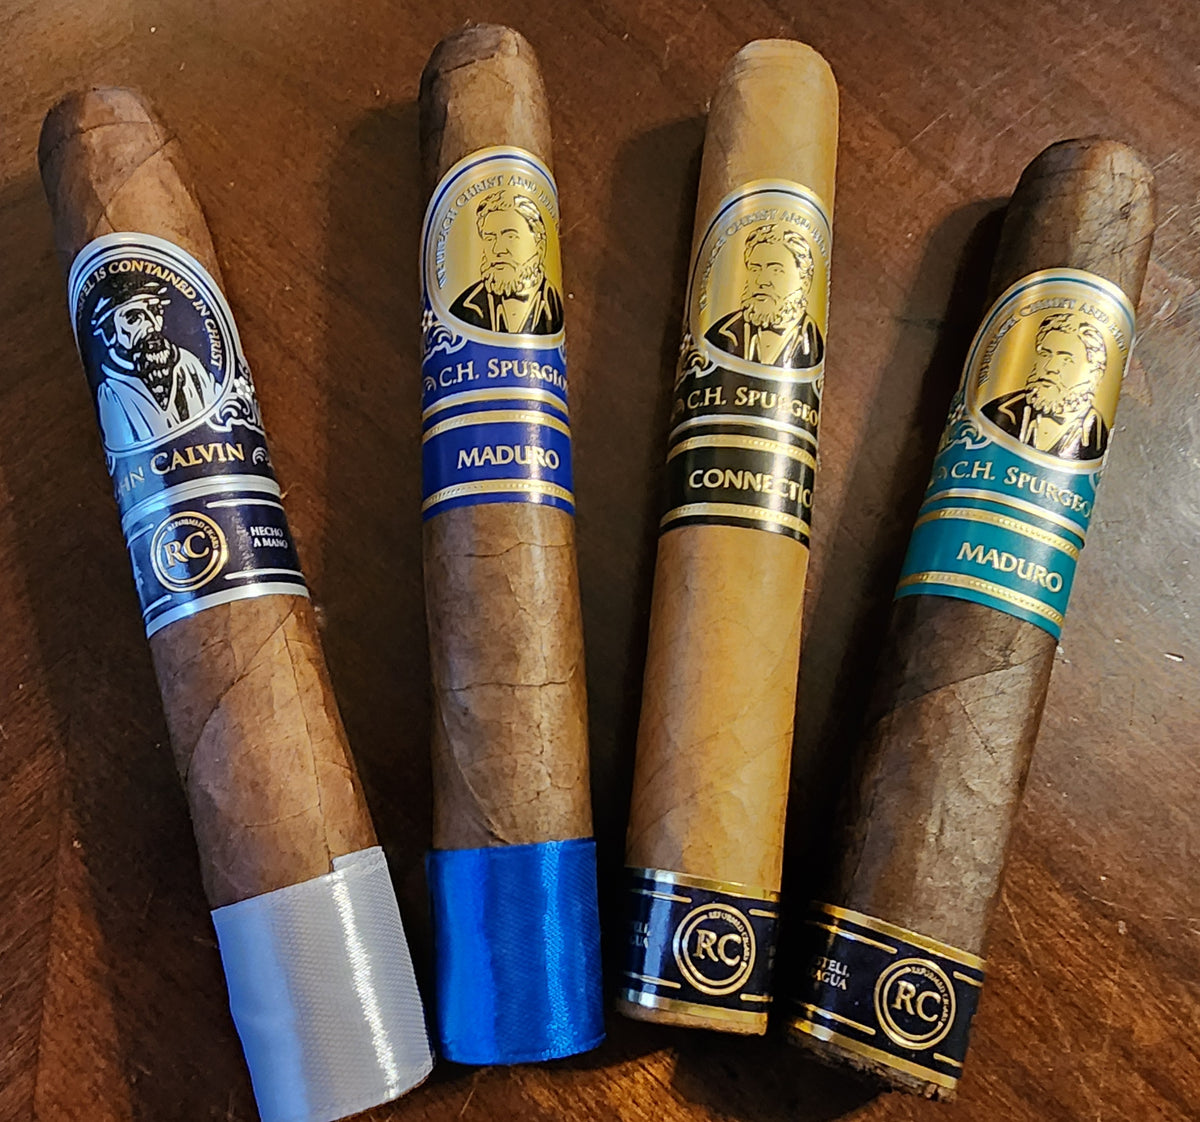 Reformed Cigars - 4 Pack Sampler May Vary in Sizes